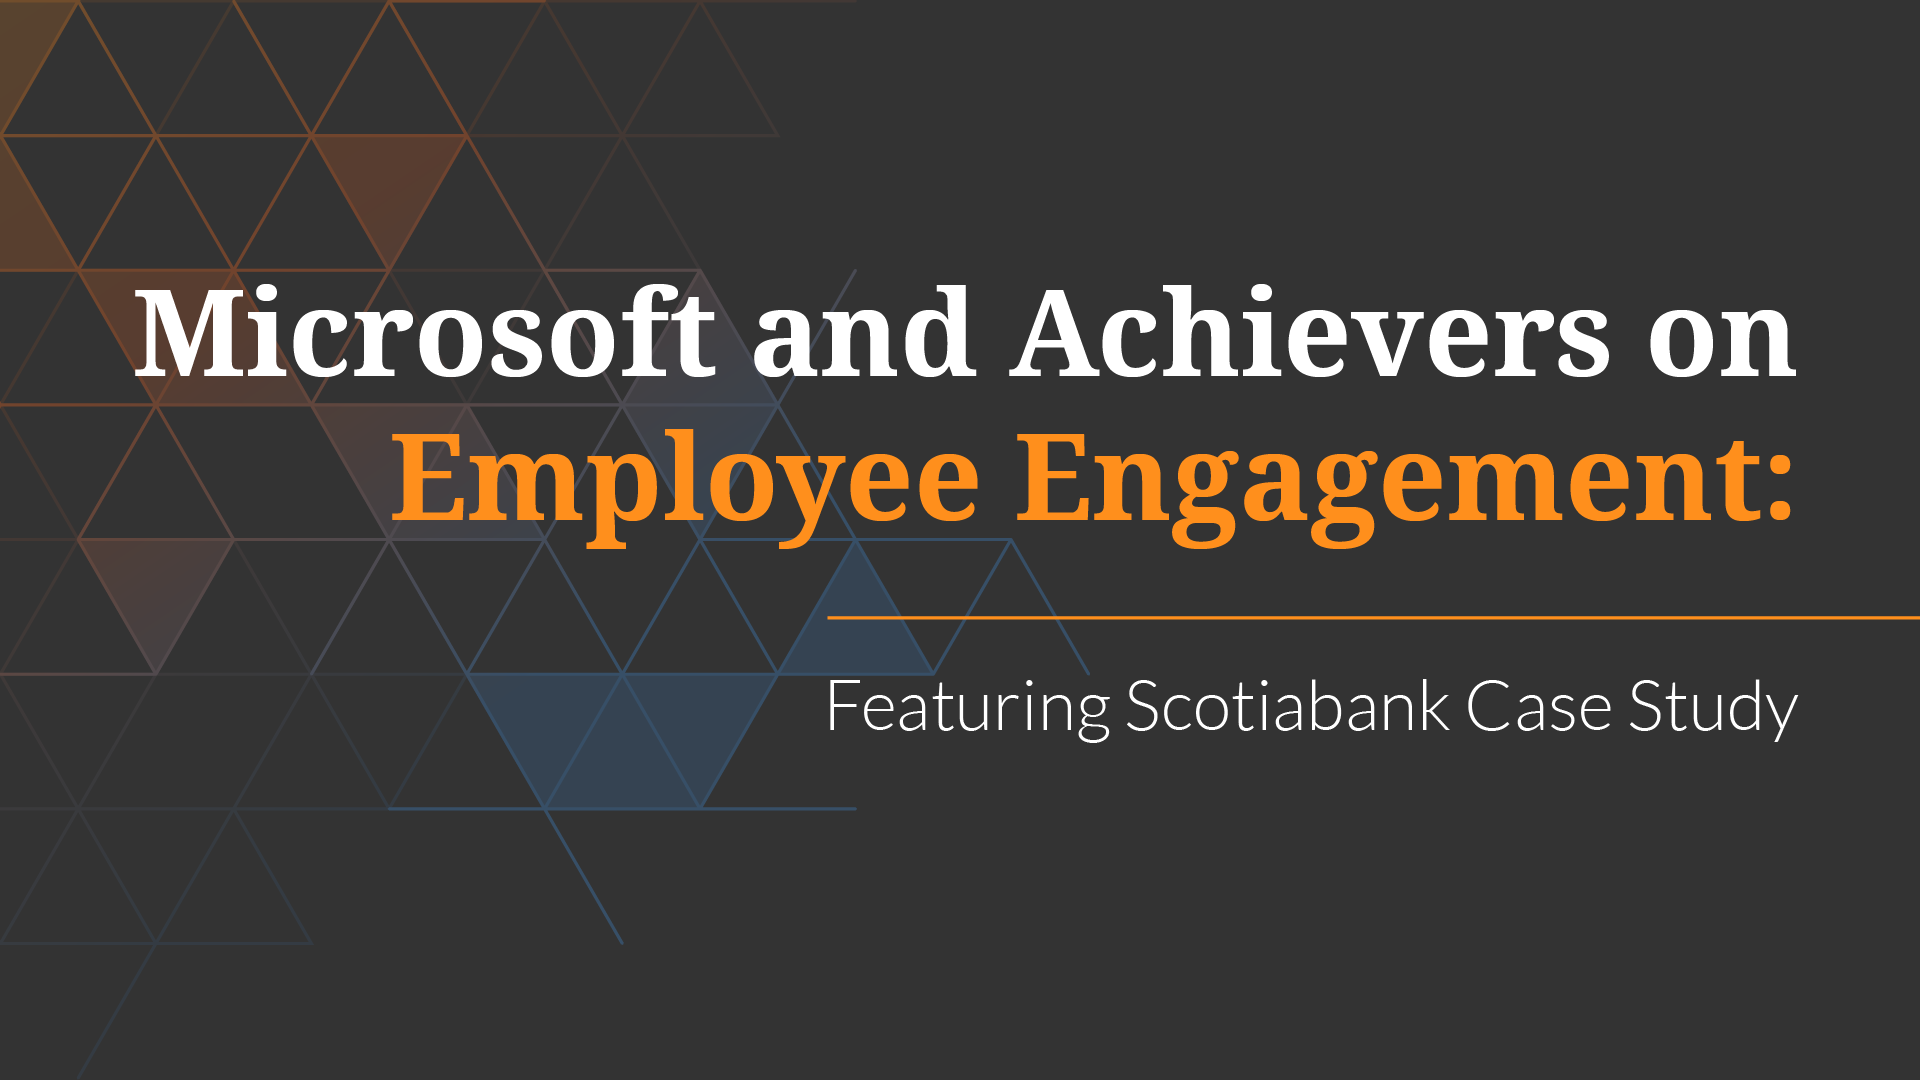 Microsoft and Achievers on Employee Engagement